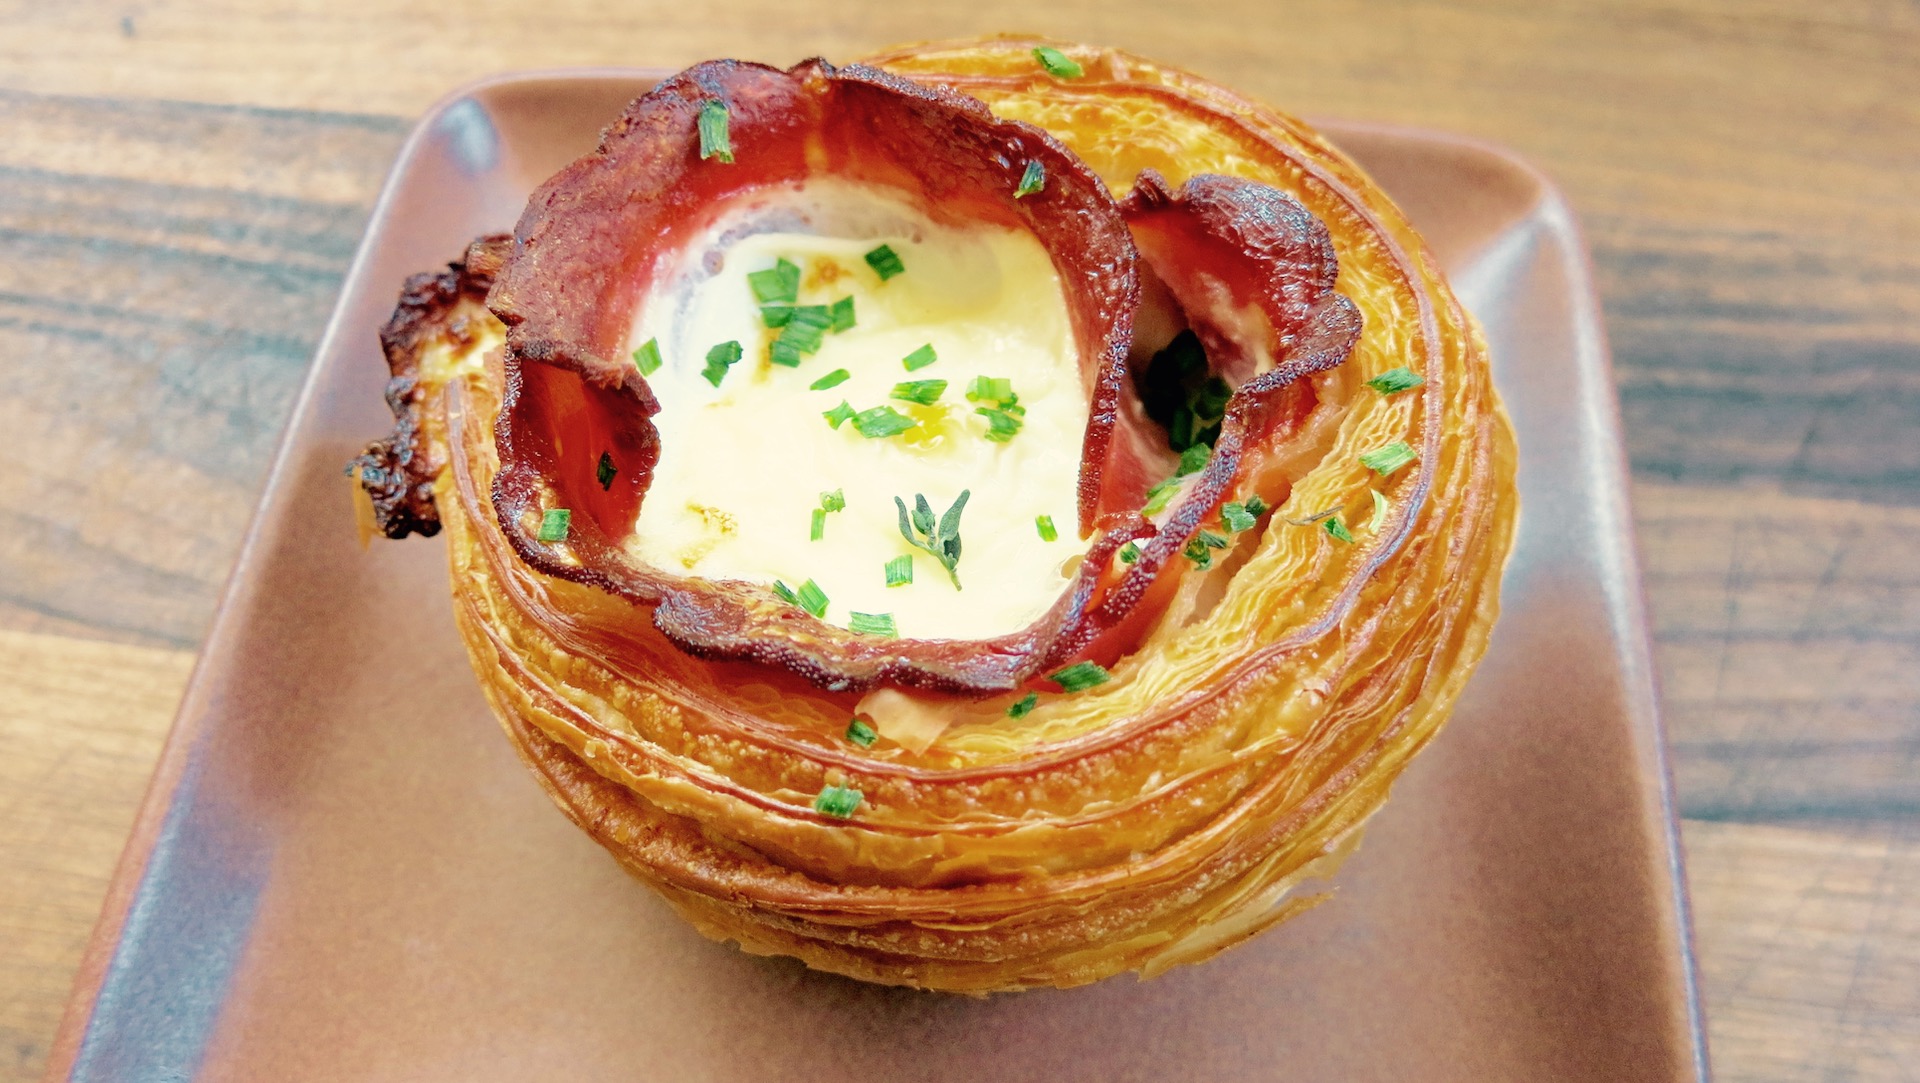 The magnificent ham-and-cheese croissant from Fournée Bakery.